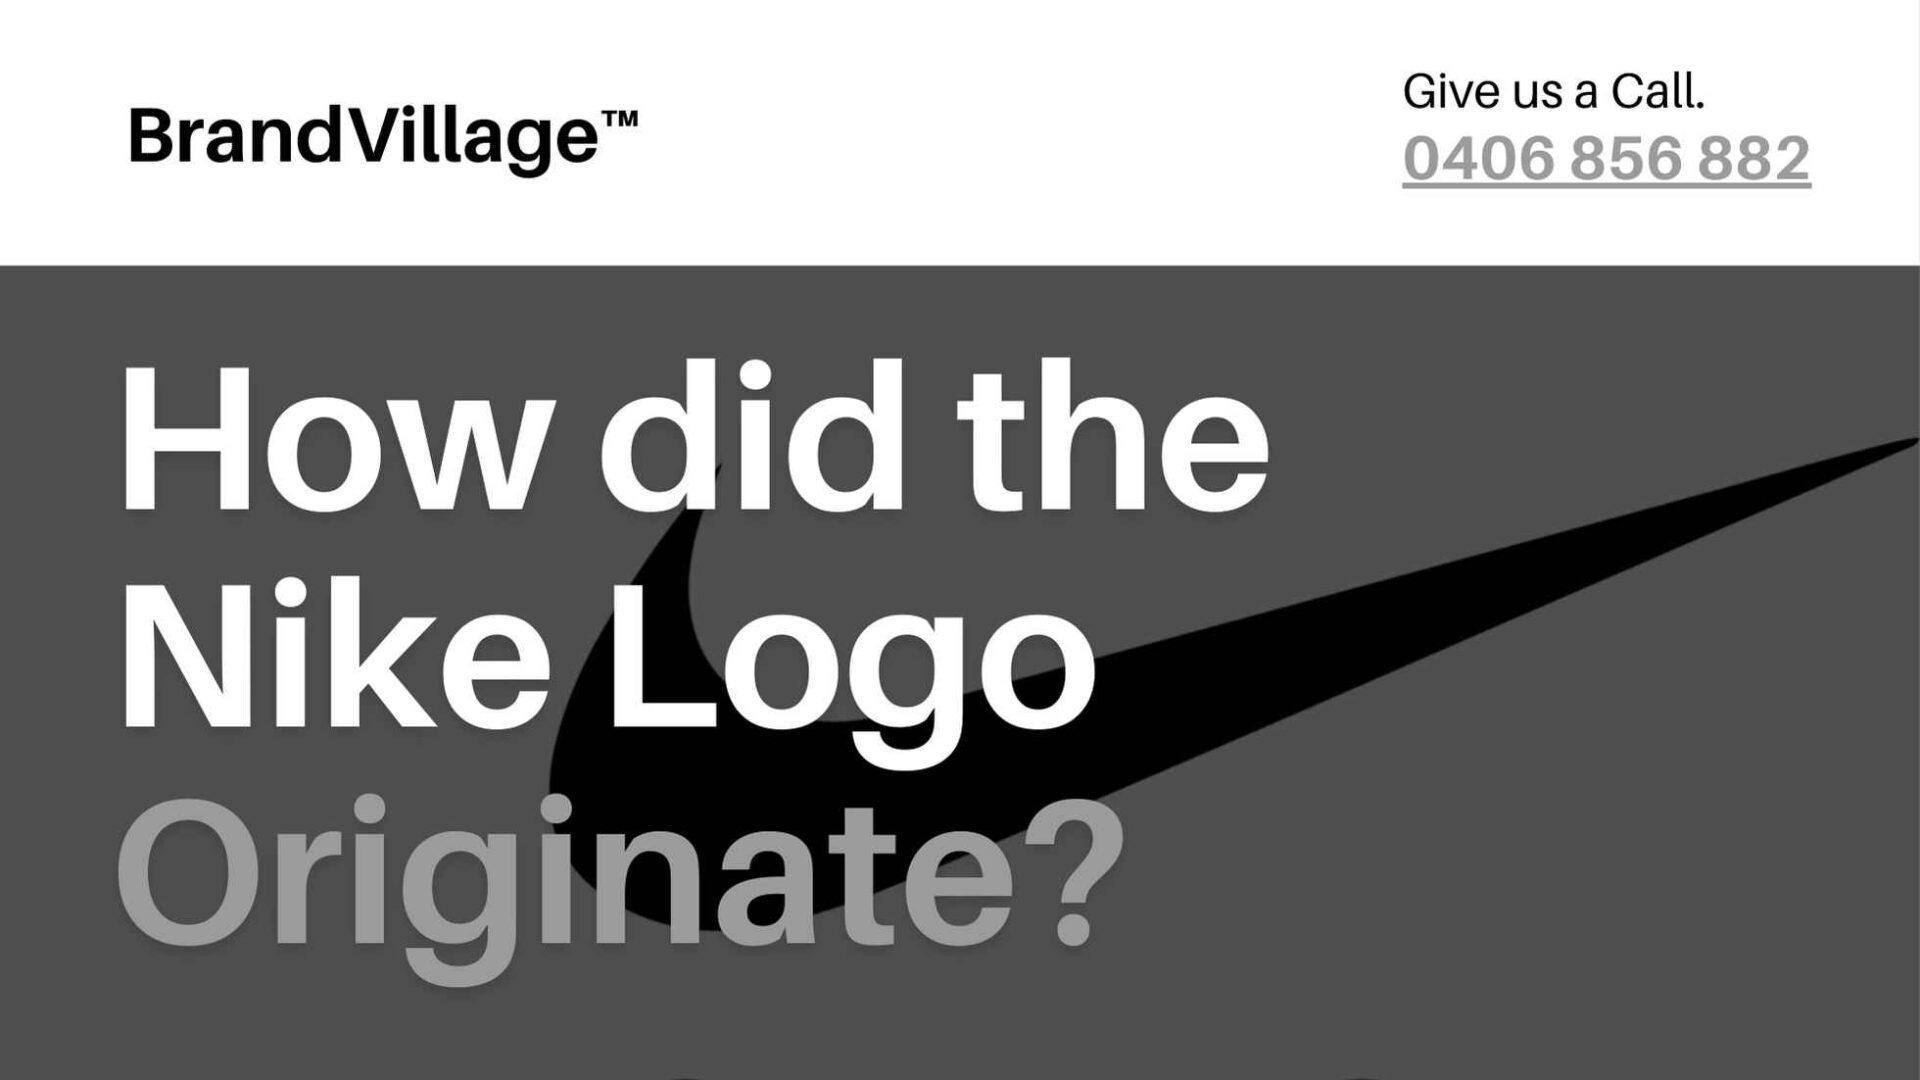 How did the Nike Logo Originate?” in a large font. The logo is a black swoosh on a white background. The top left corner has the text “BrandVillage™” in a smaller font. The top right corner has the text “Give us a Call. 0406 856 882” in a smaller font. The background is a gradient from black to white.